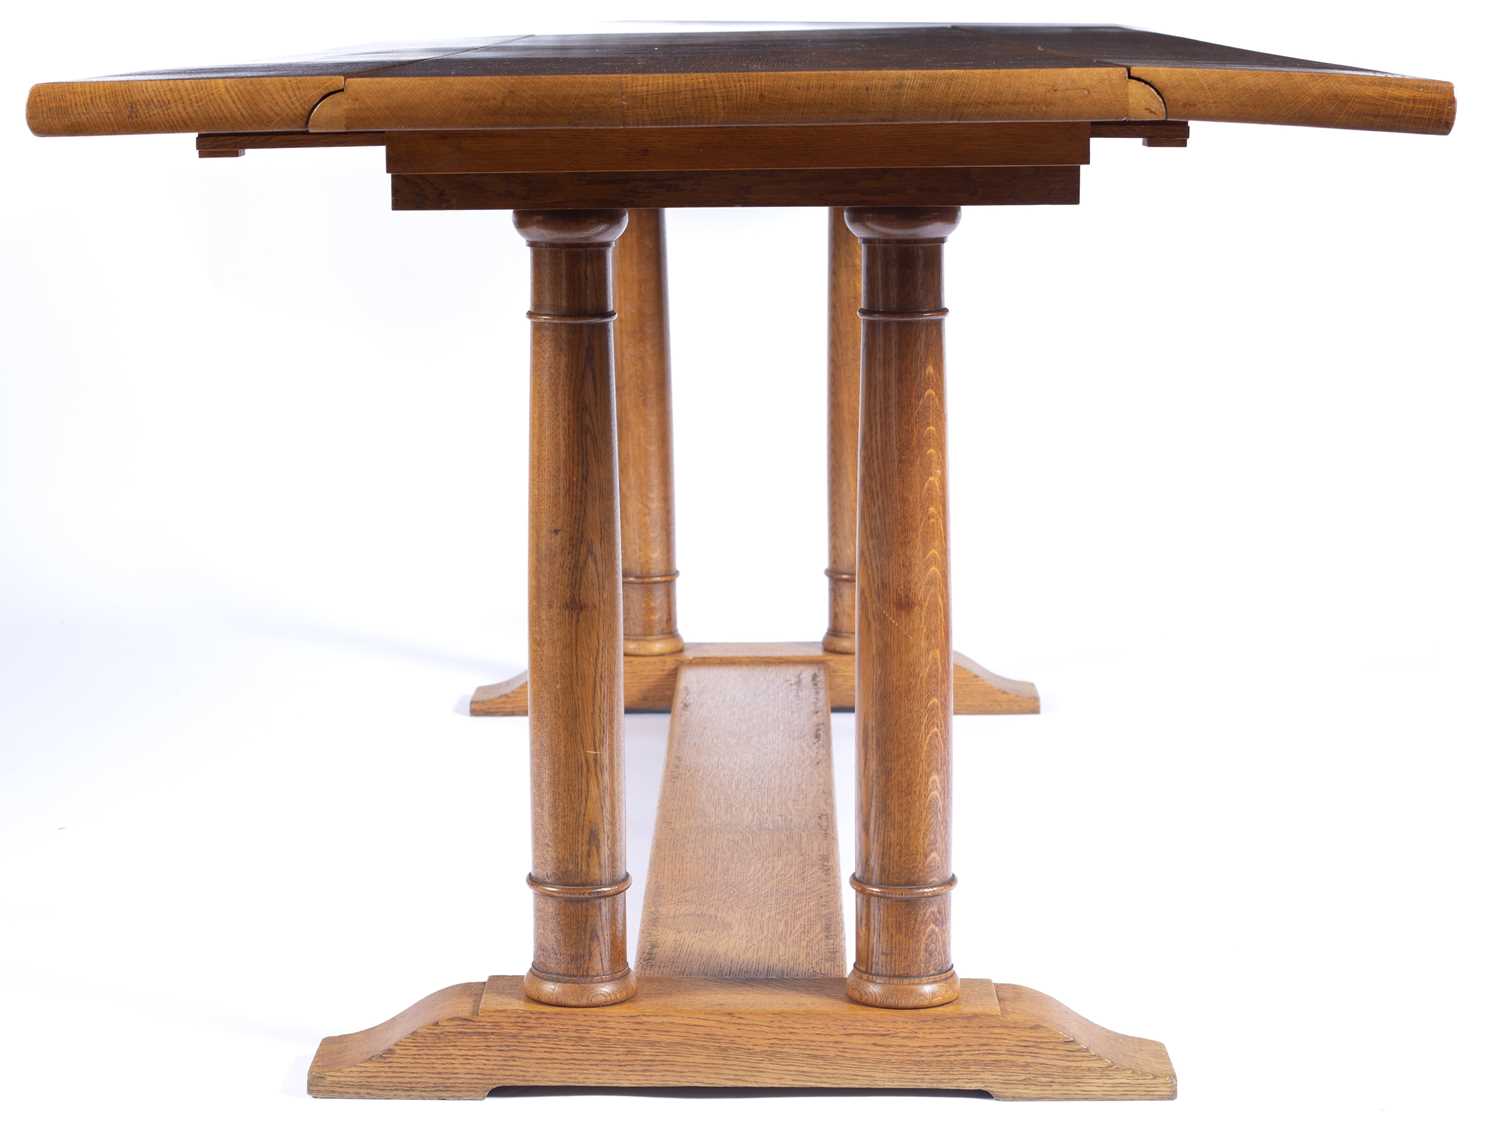 Heals 'Tilden' oak refectory table, circa 1920, with later modifications to make it into a drop-leaf - Image 2 of 4